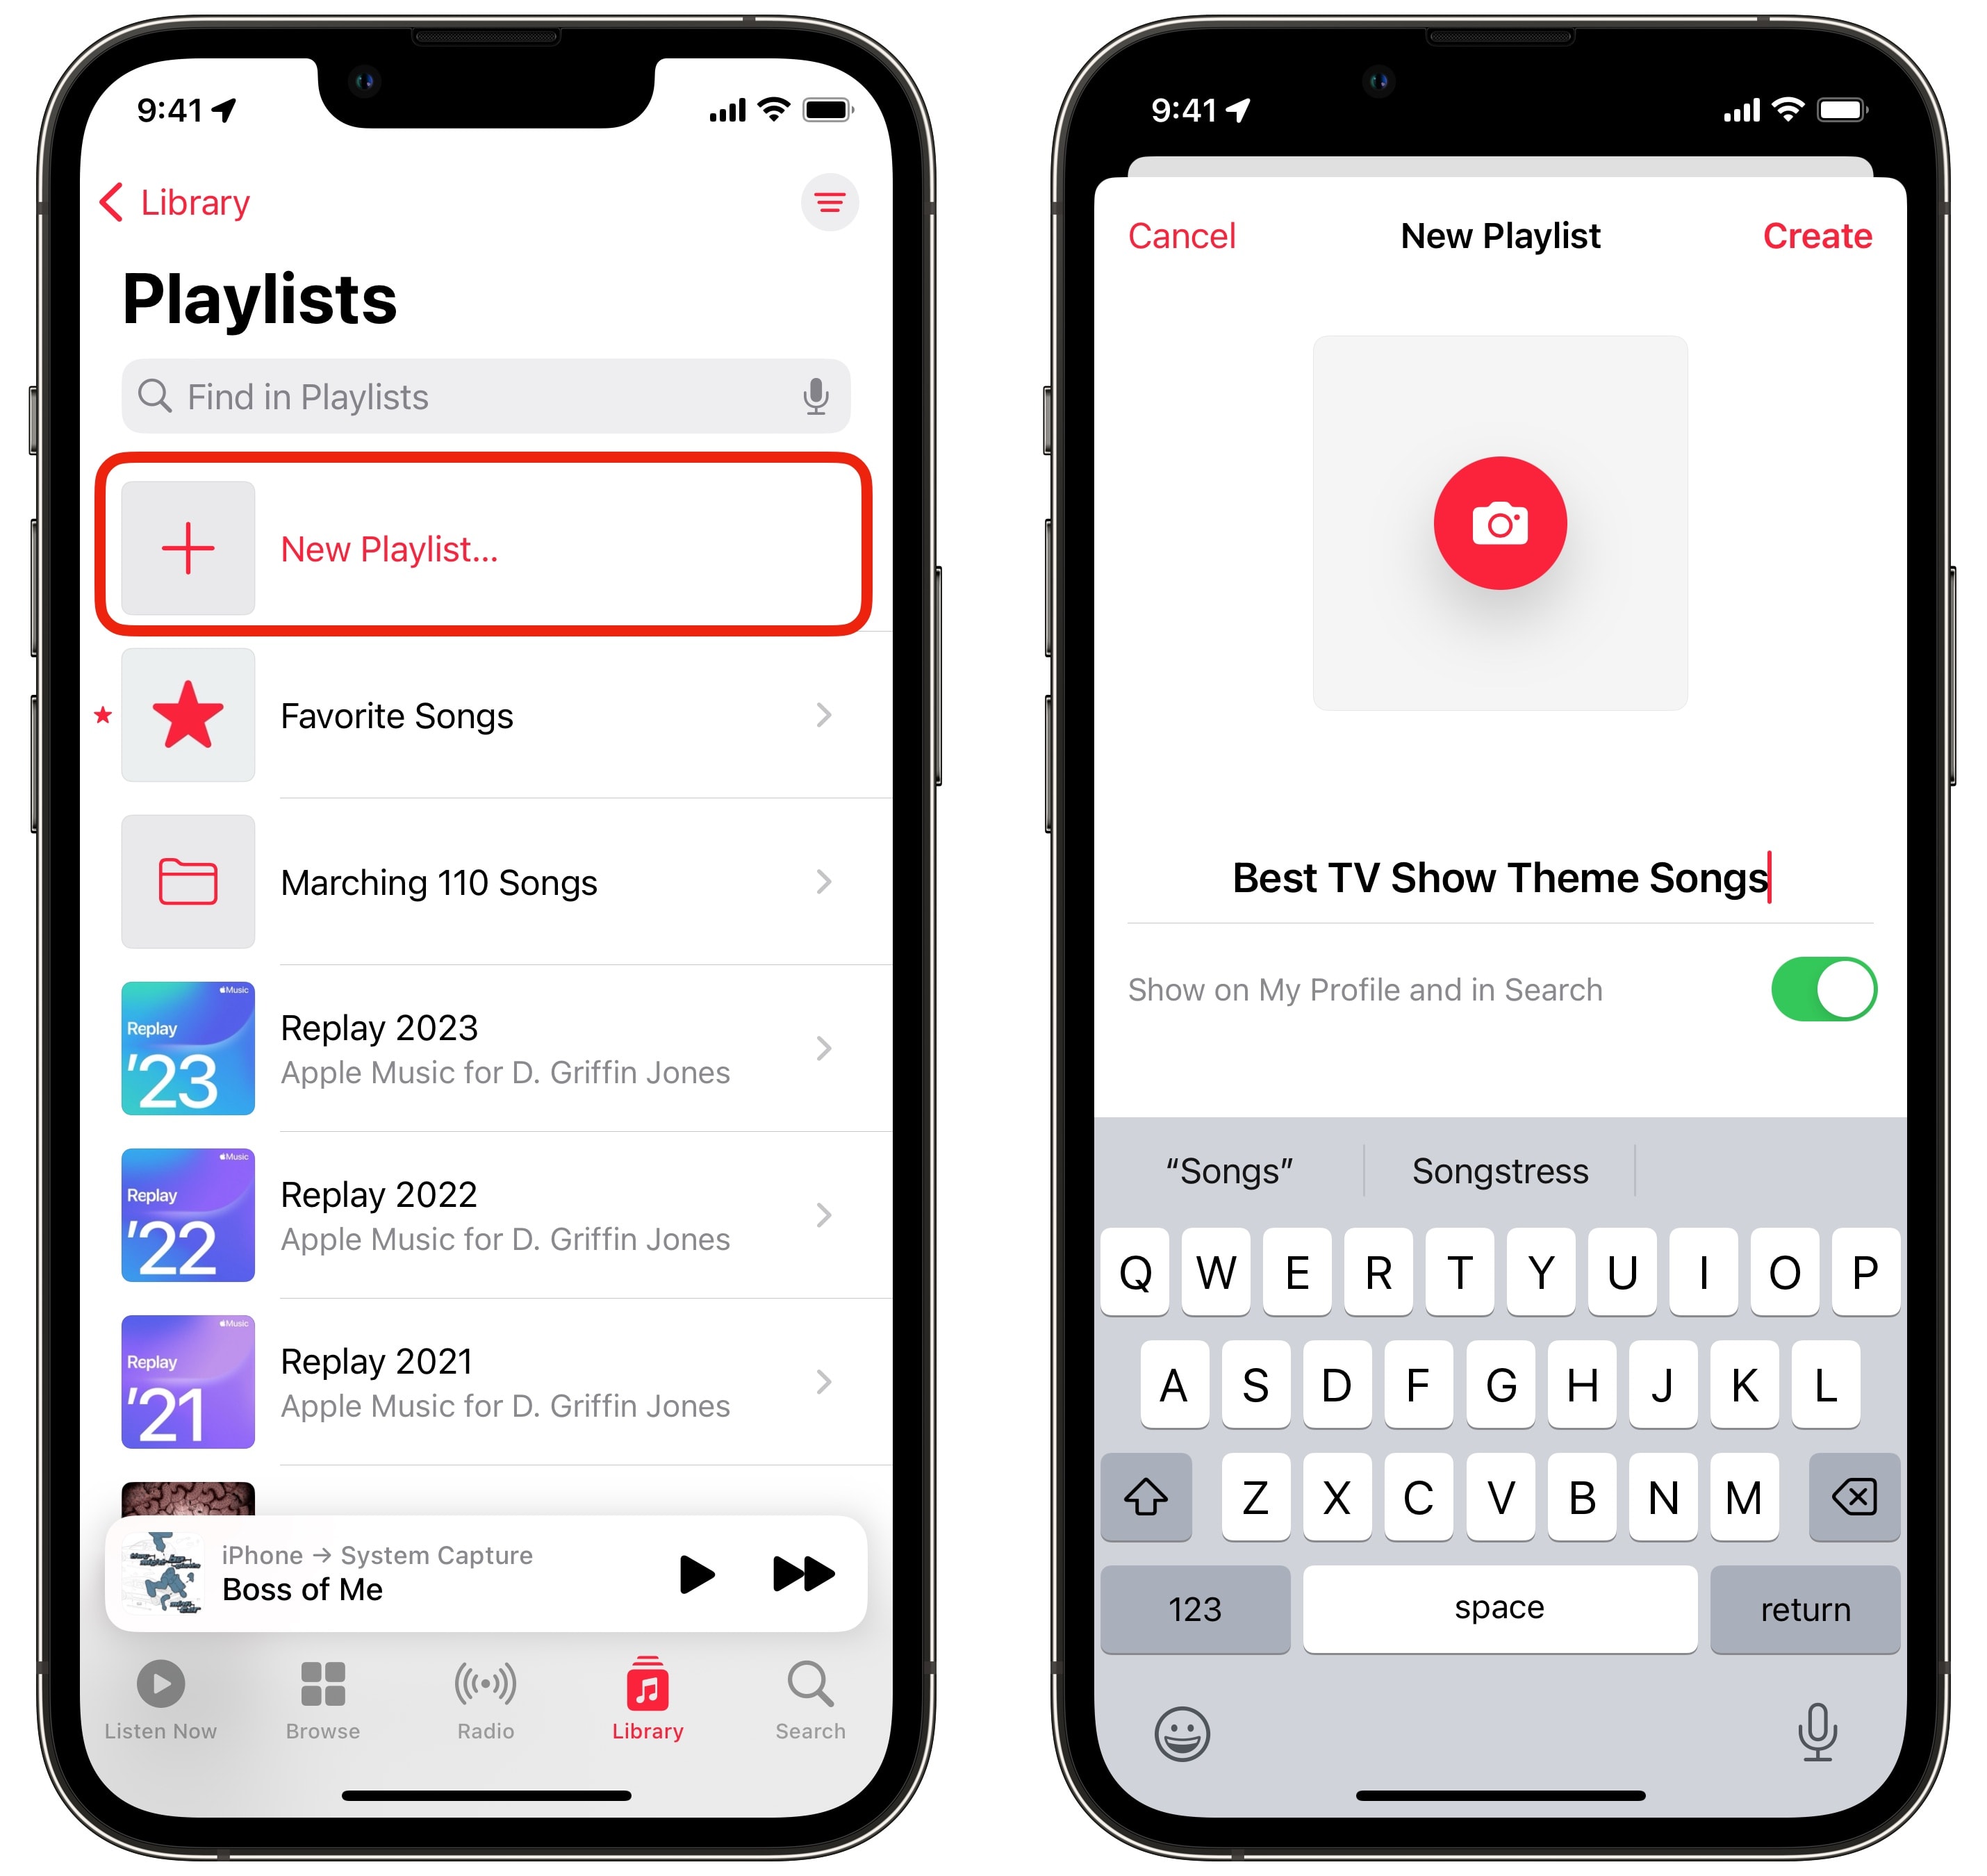 Creating a new playlist called Best TV Show Theme Songs in Apple Music